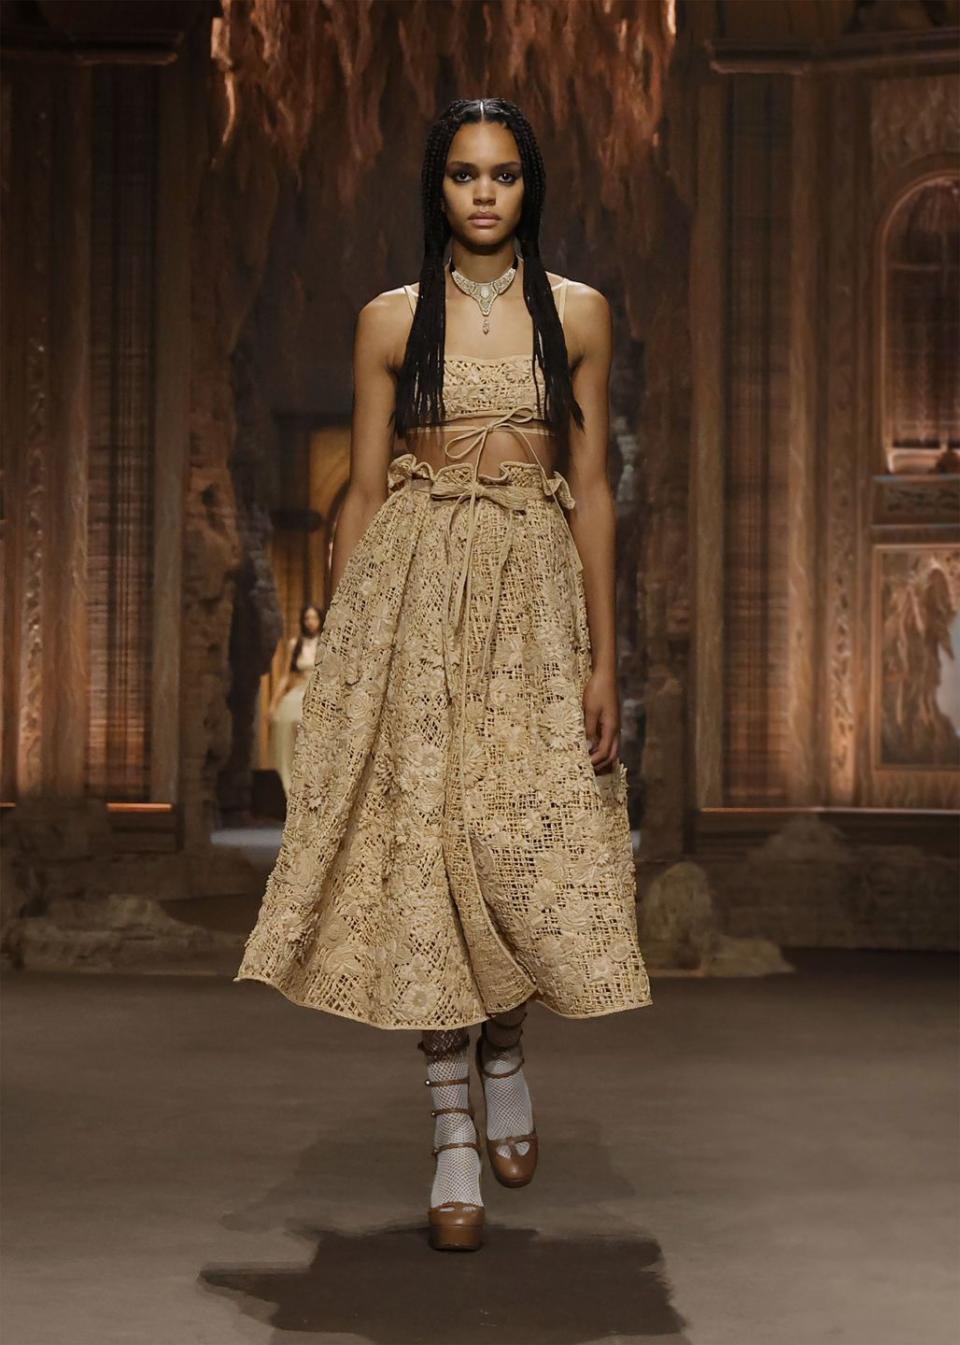 model walking the runway in a rattan dress and long braids